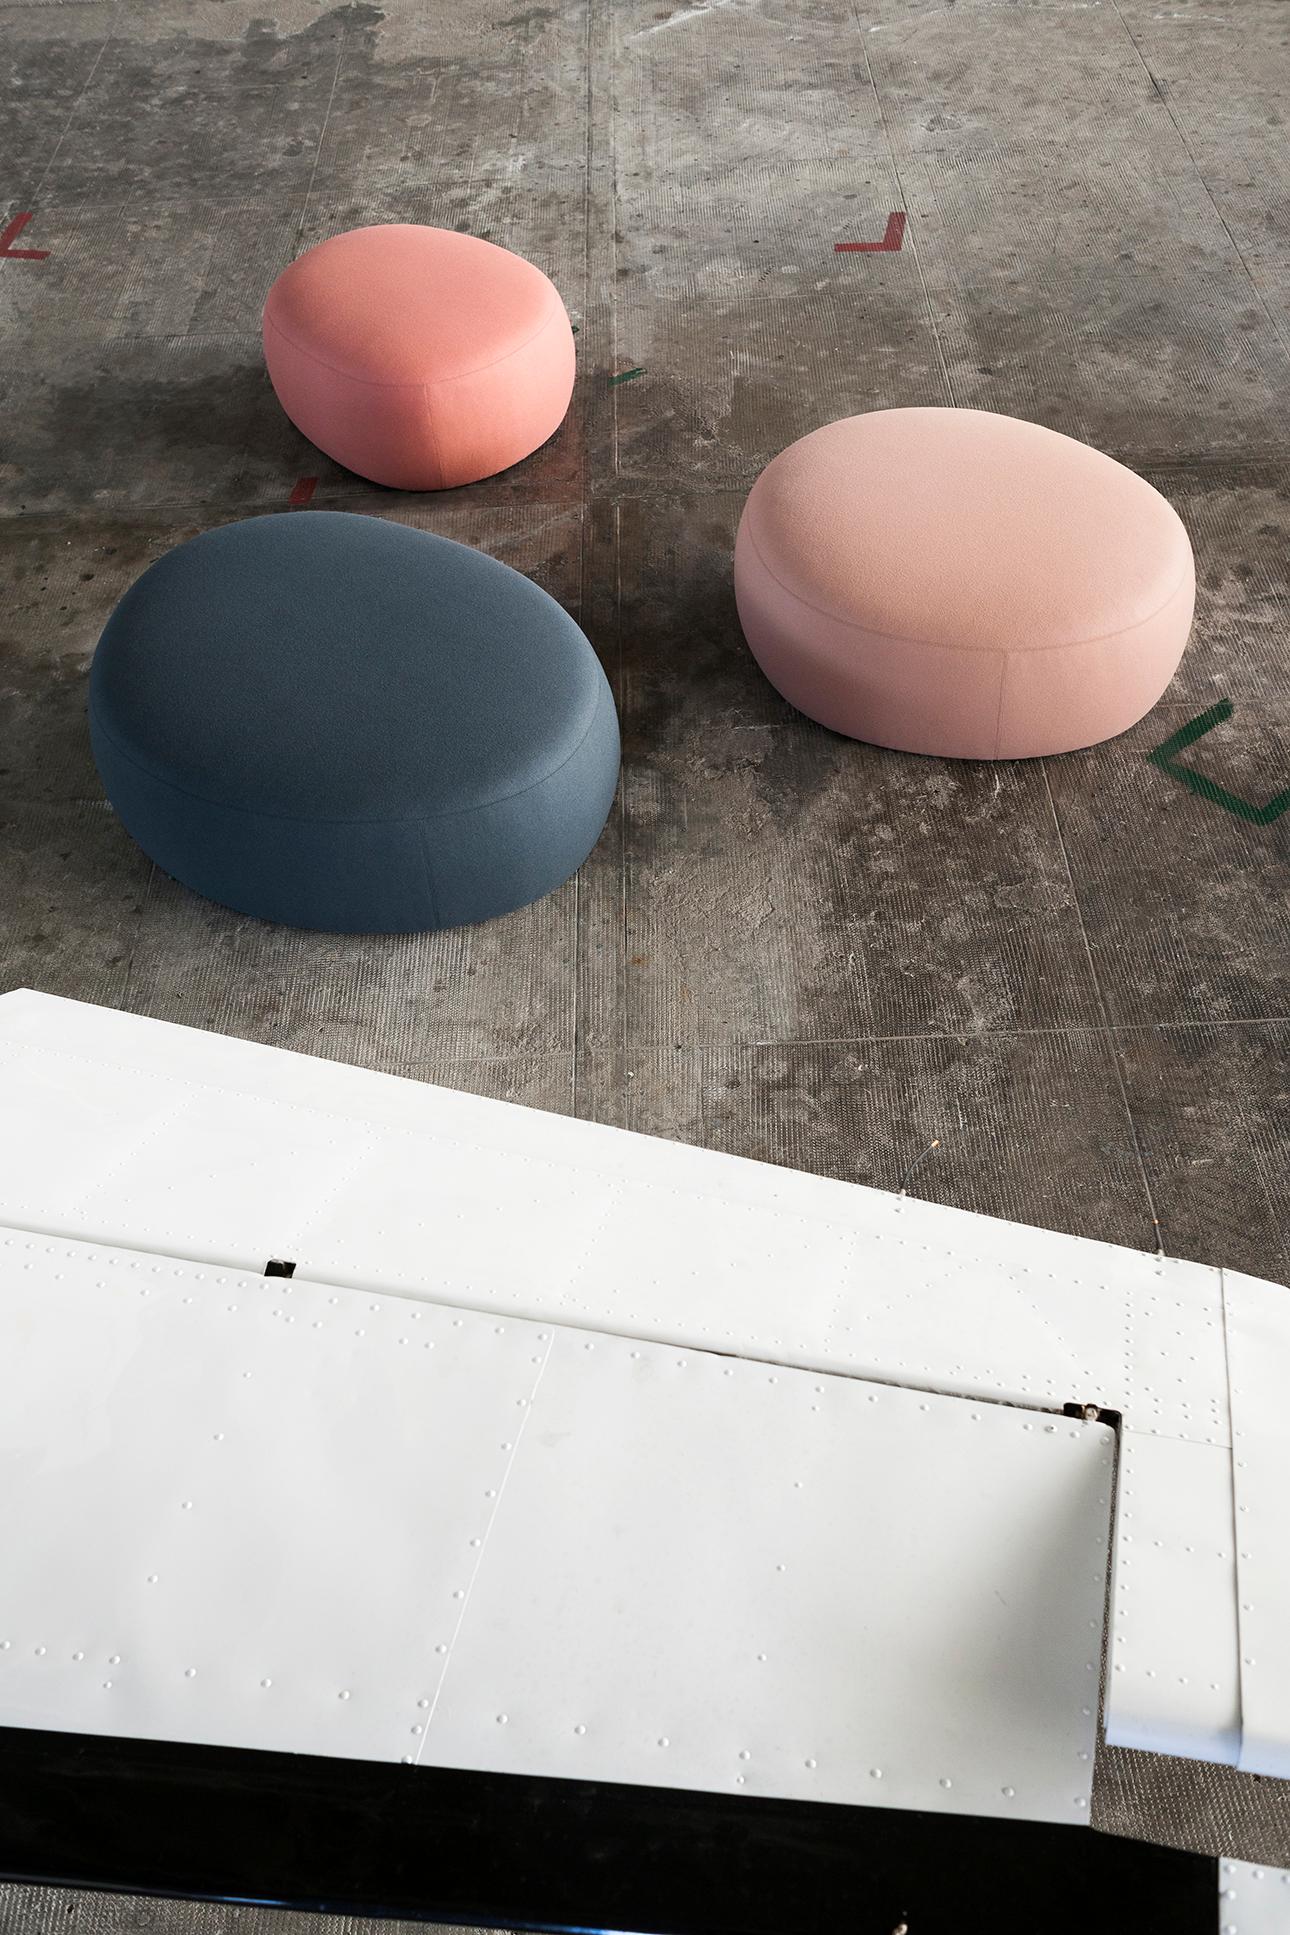 Tacchini Large Matera Ottoman in calantha fabric by Gordon Guillaumier. Explore new creative scenarios in an imaginary tour of the extraordinary urban ecosystem – the Sassi di Matera. Here, the stratification of eras displays the continuity of past